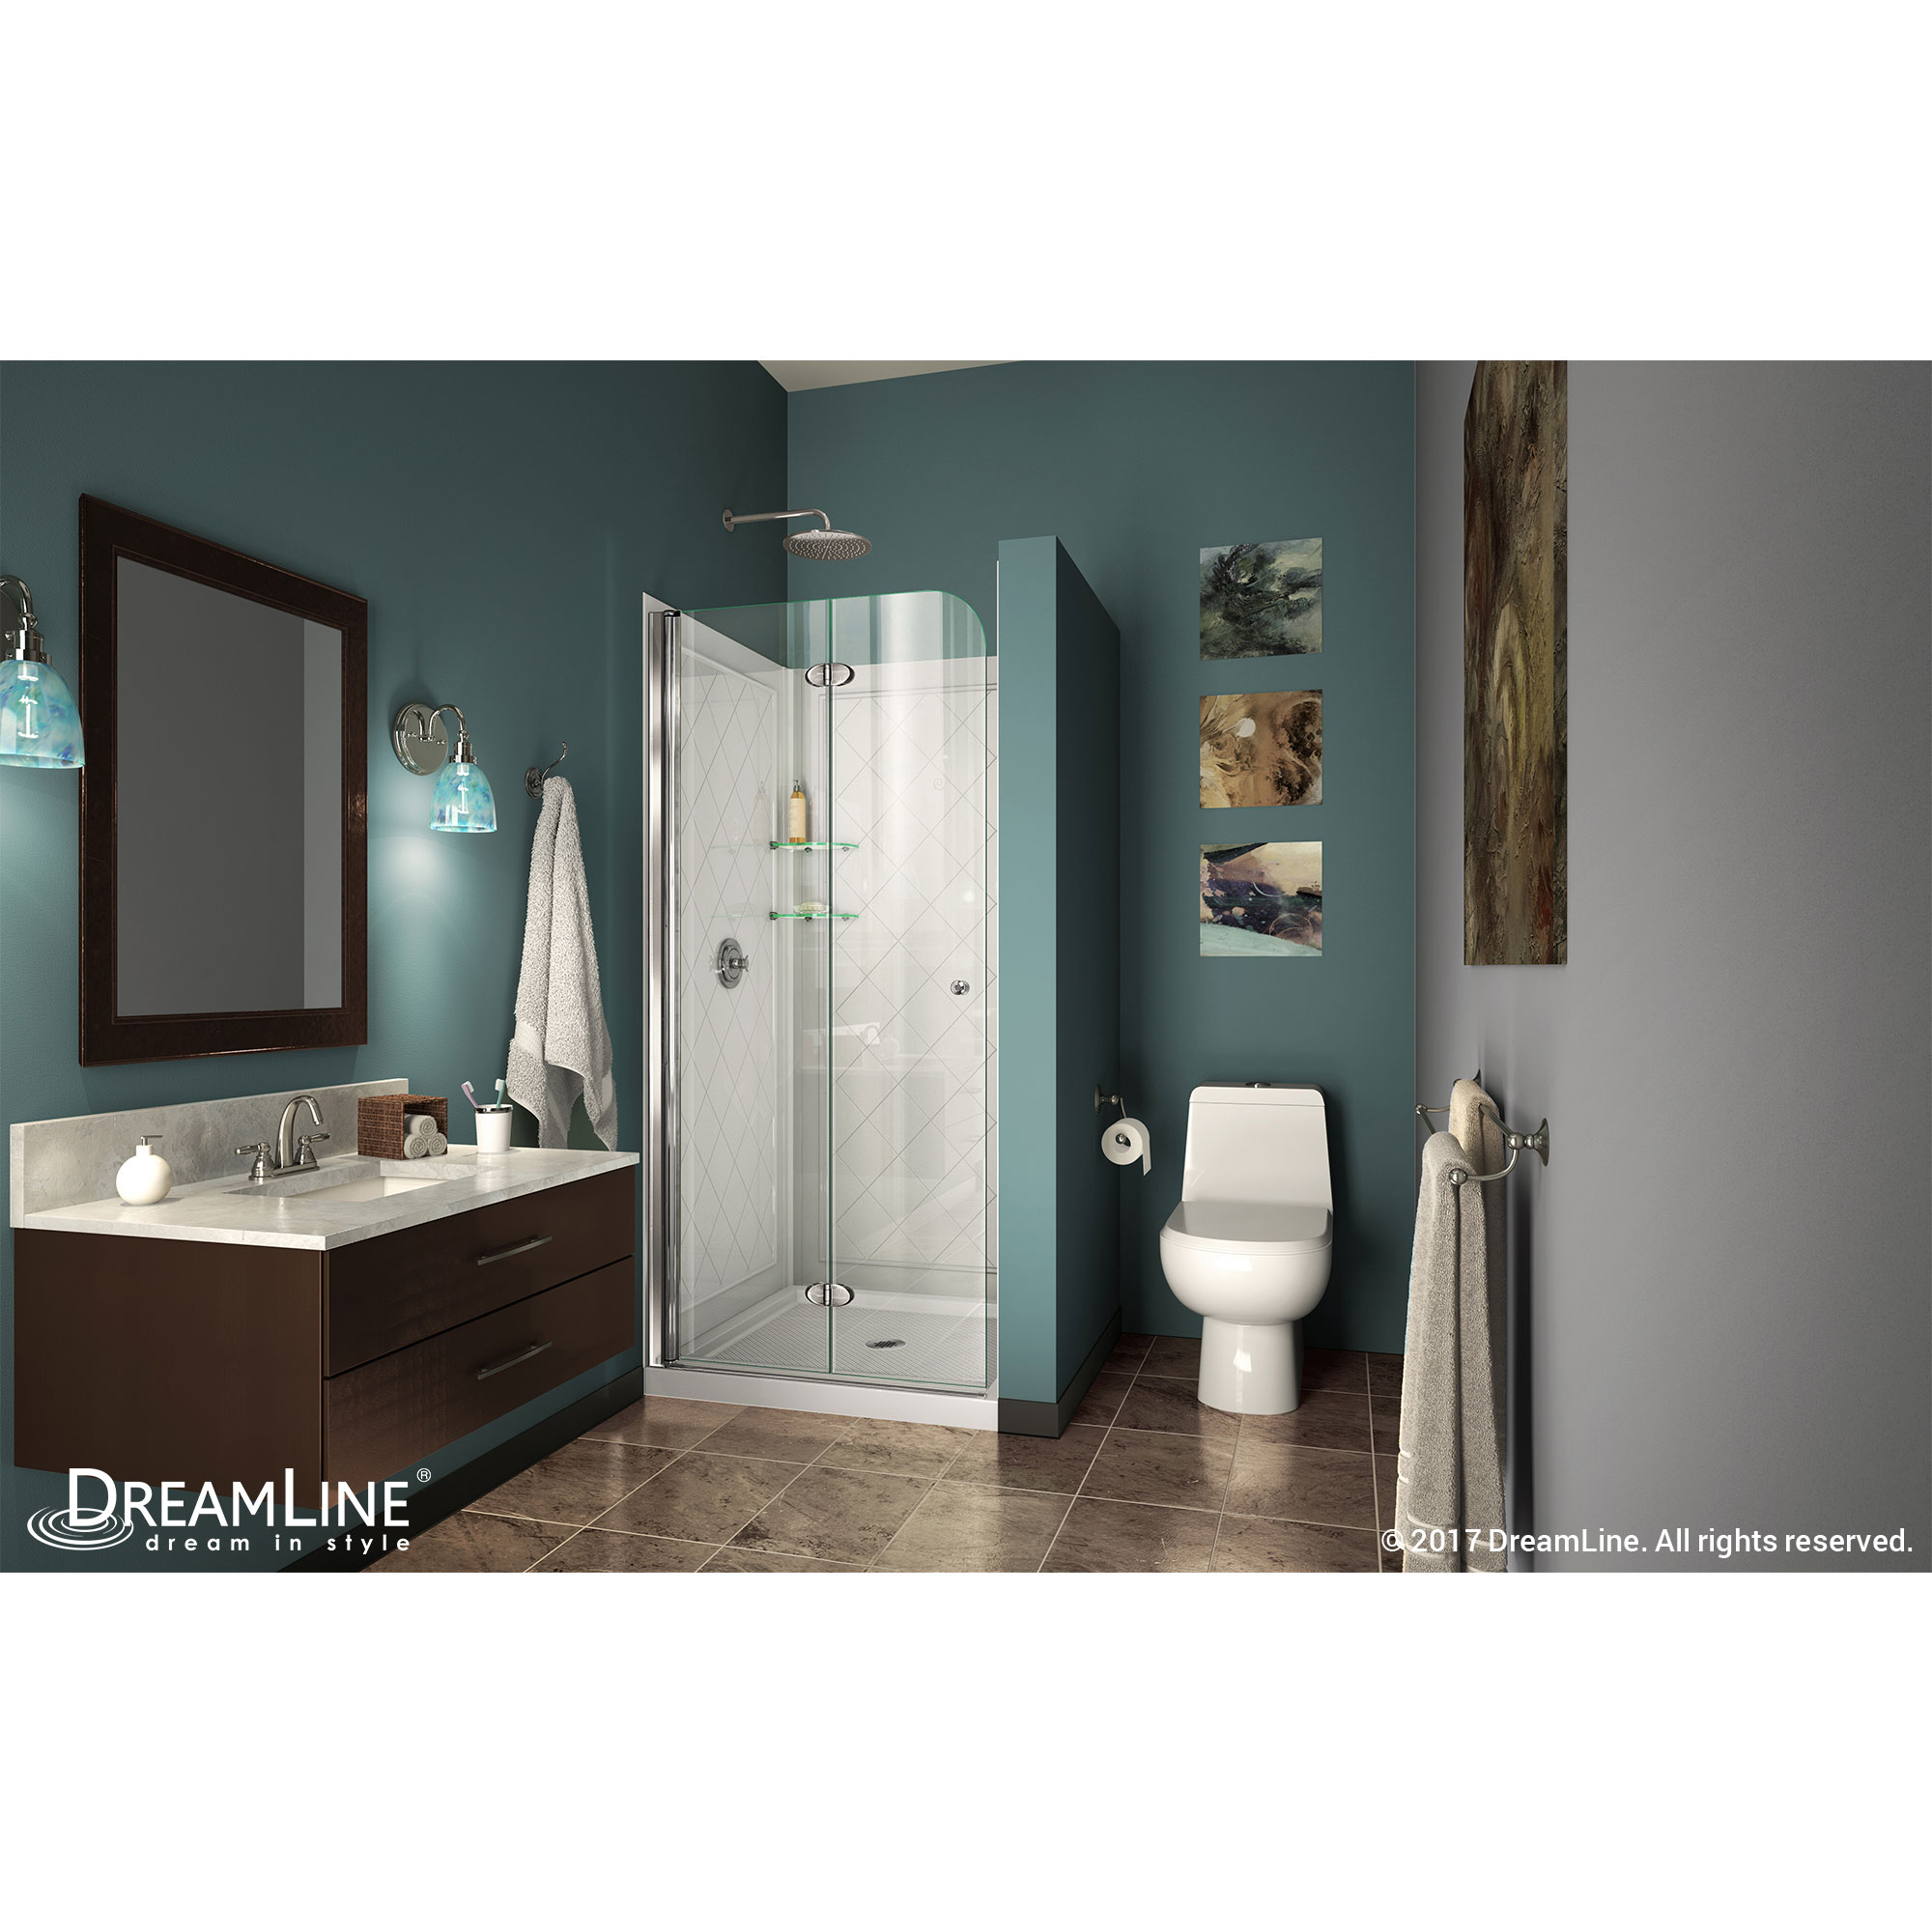 DreamLine Aqua Fold 36 in. D x 36 in. W x 74 3/4 in. H Bi-Fold Shower Door in Chrome with White Acrylic Base and Backwall Kit